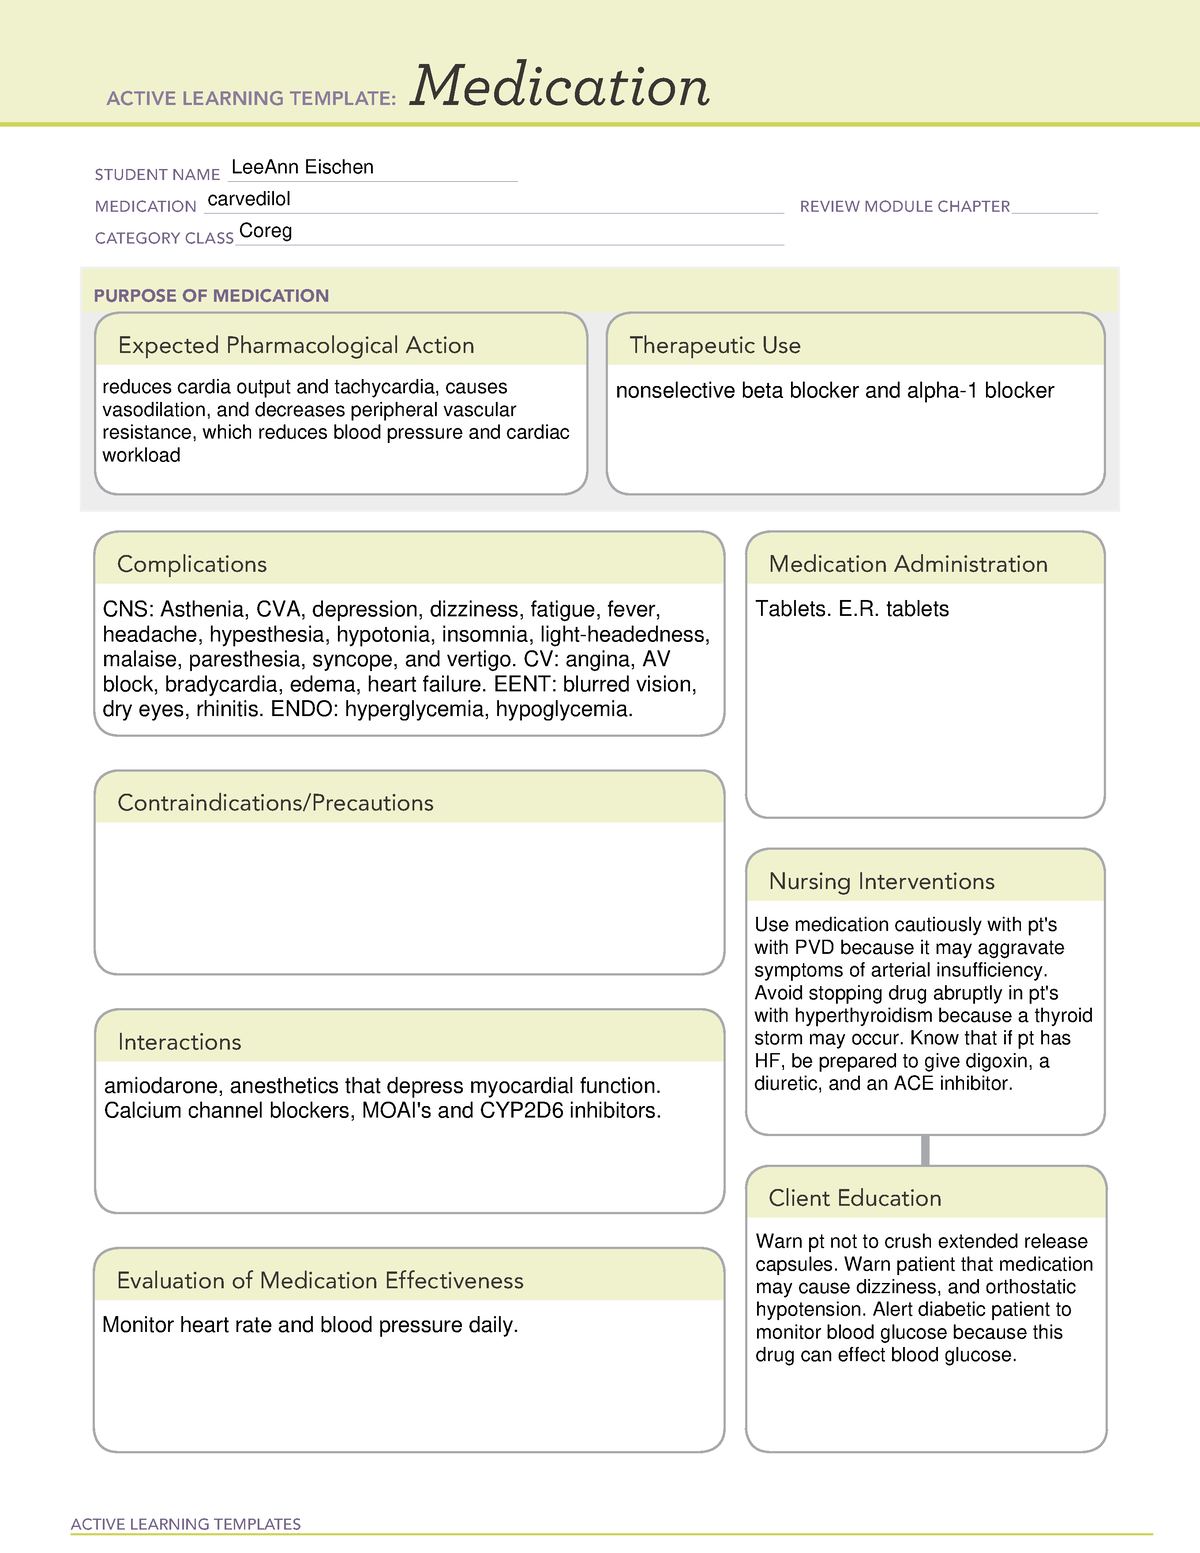 carvedilol-medication-sheet-template-ati-active-learning-templates